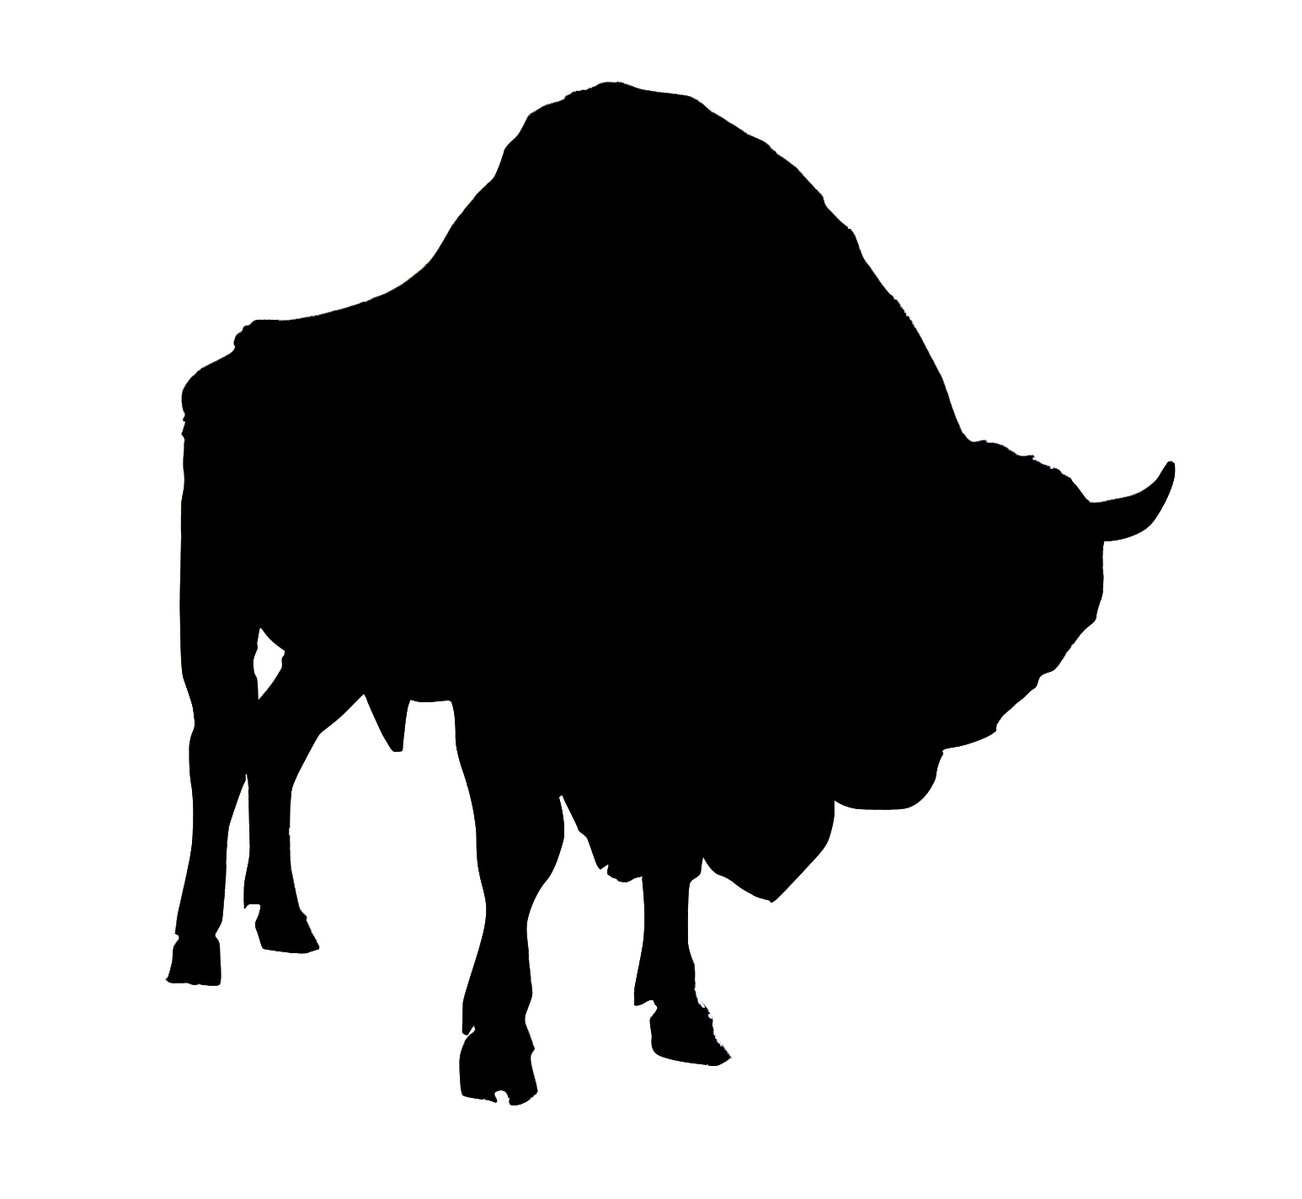 a black silhouette of a buffalo standing up